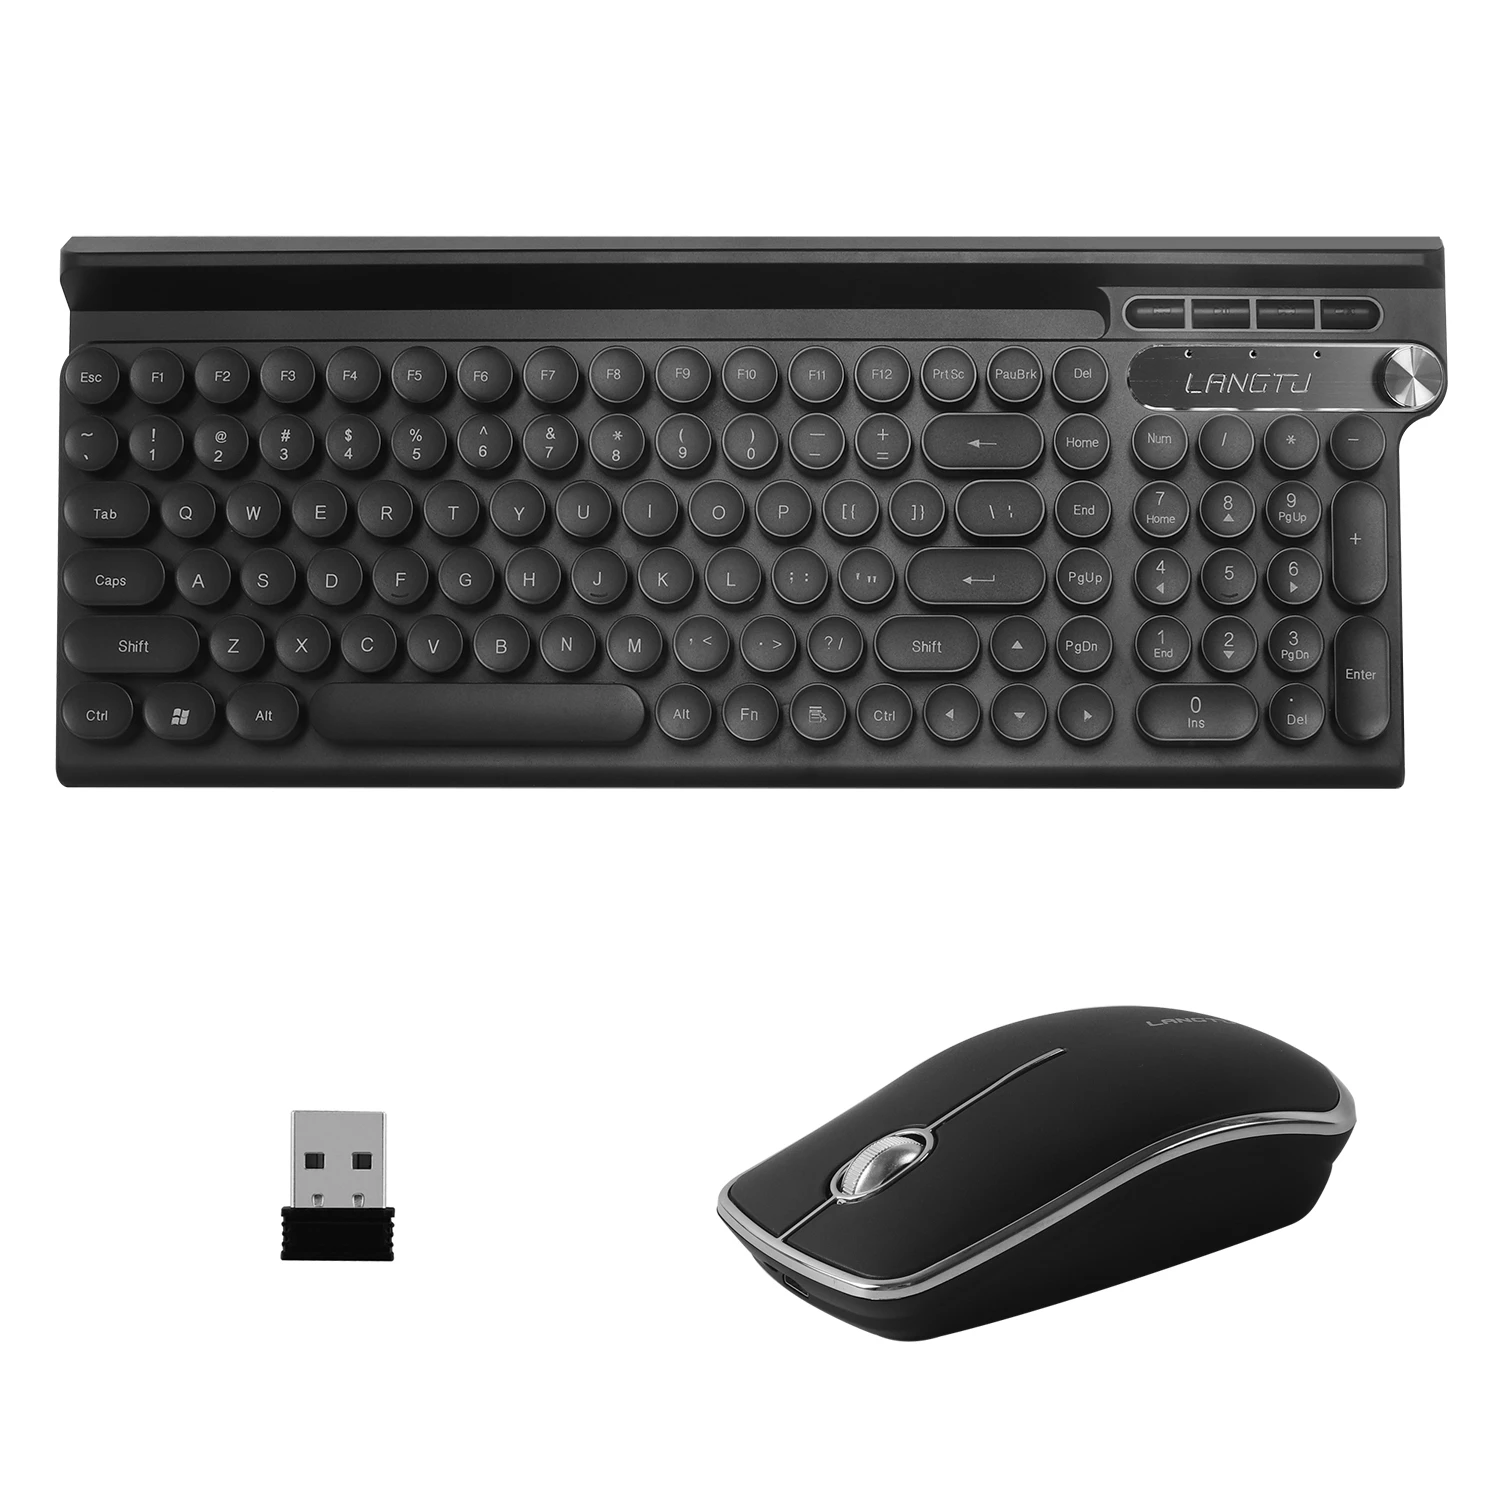 2.4g Ultra Thin Wireless Rechargeable Keyboard Mouse Combo 1600dpi 102 Key Keyboard For Laptop Desktop Pc Home Office Use - Keyboard Mouse Combos - AliExpress